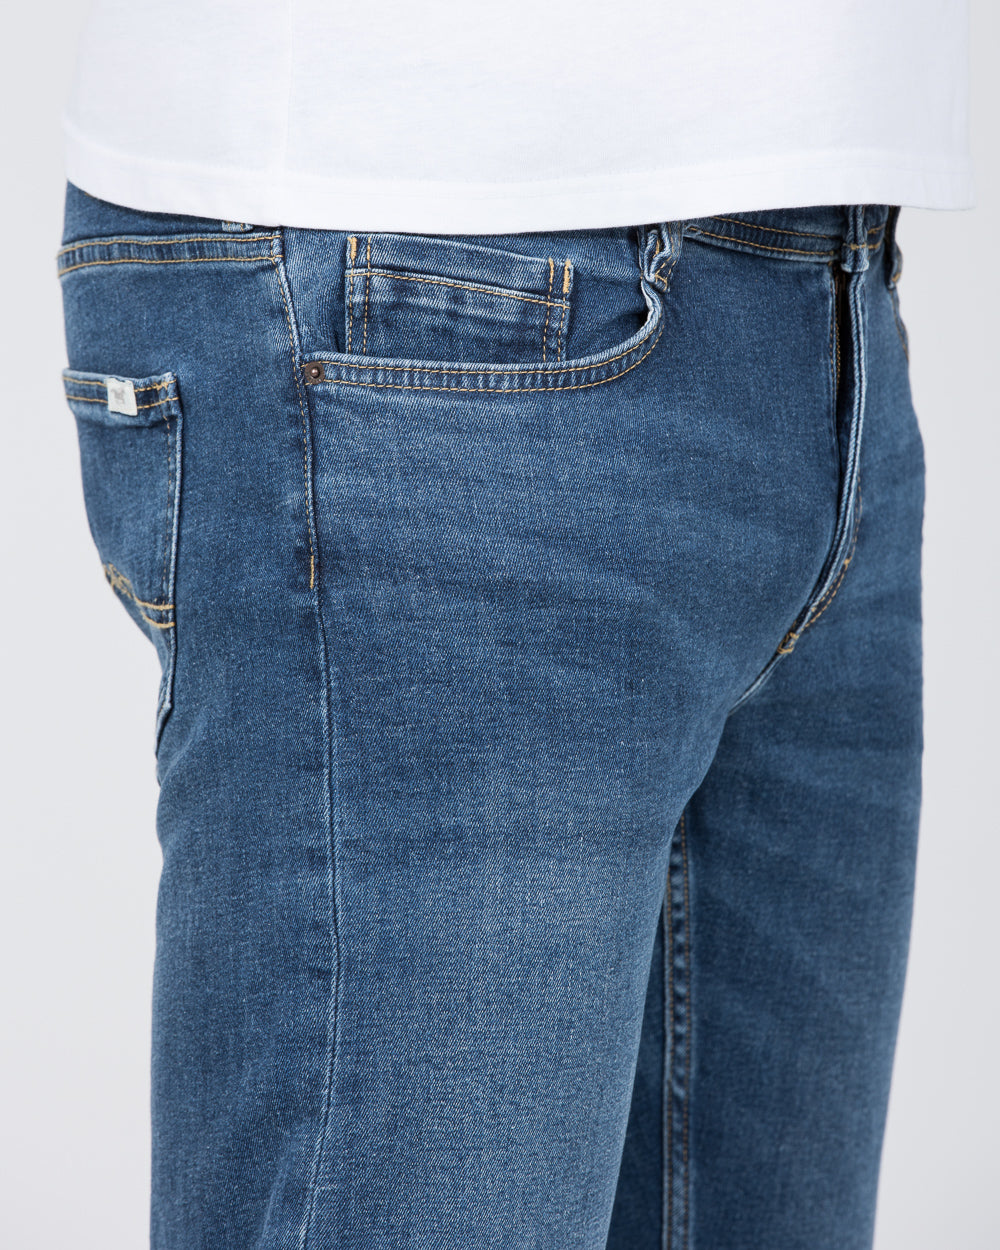 Mustang Oregon Slim Fit Tall Jeans (mid blue)